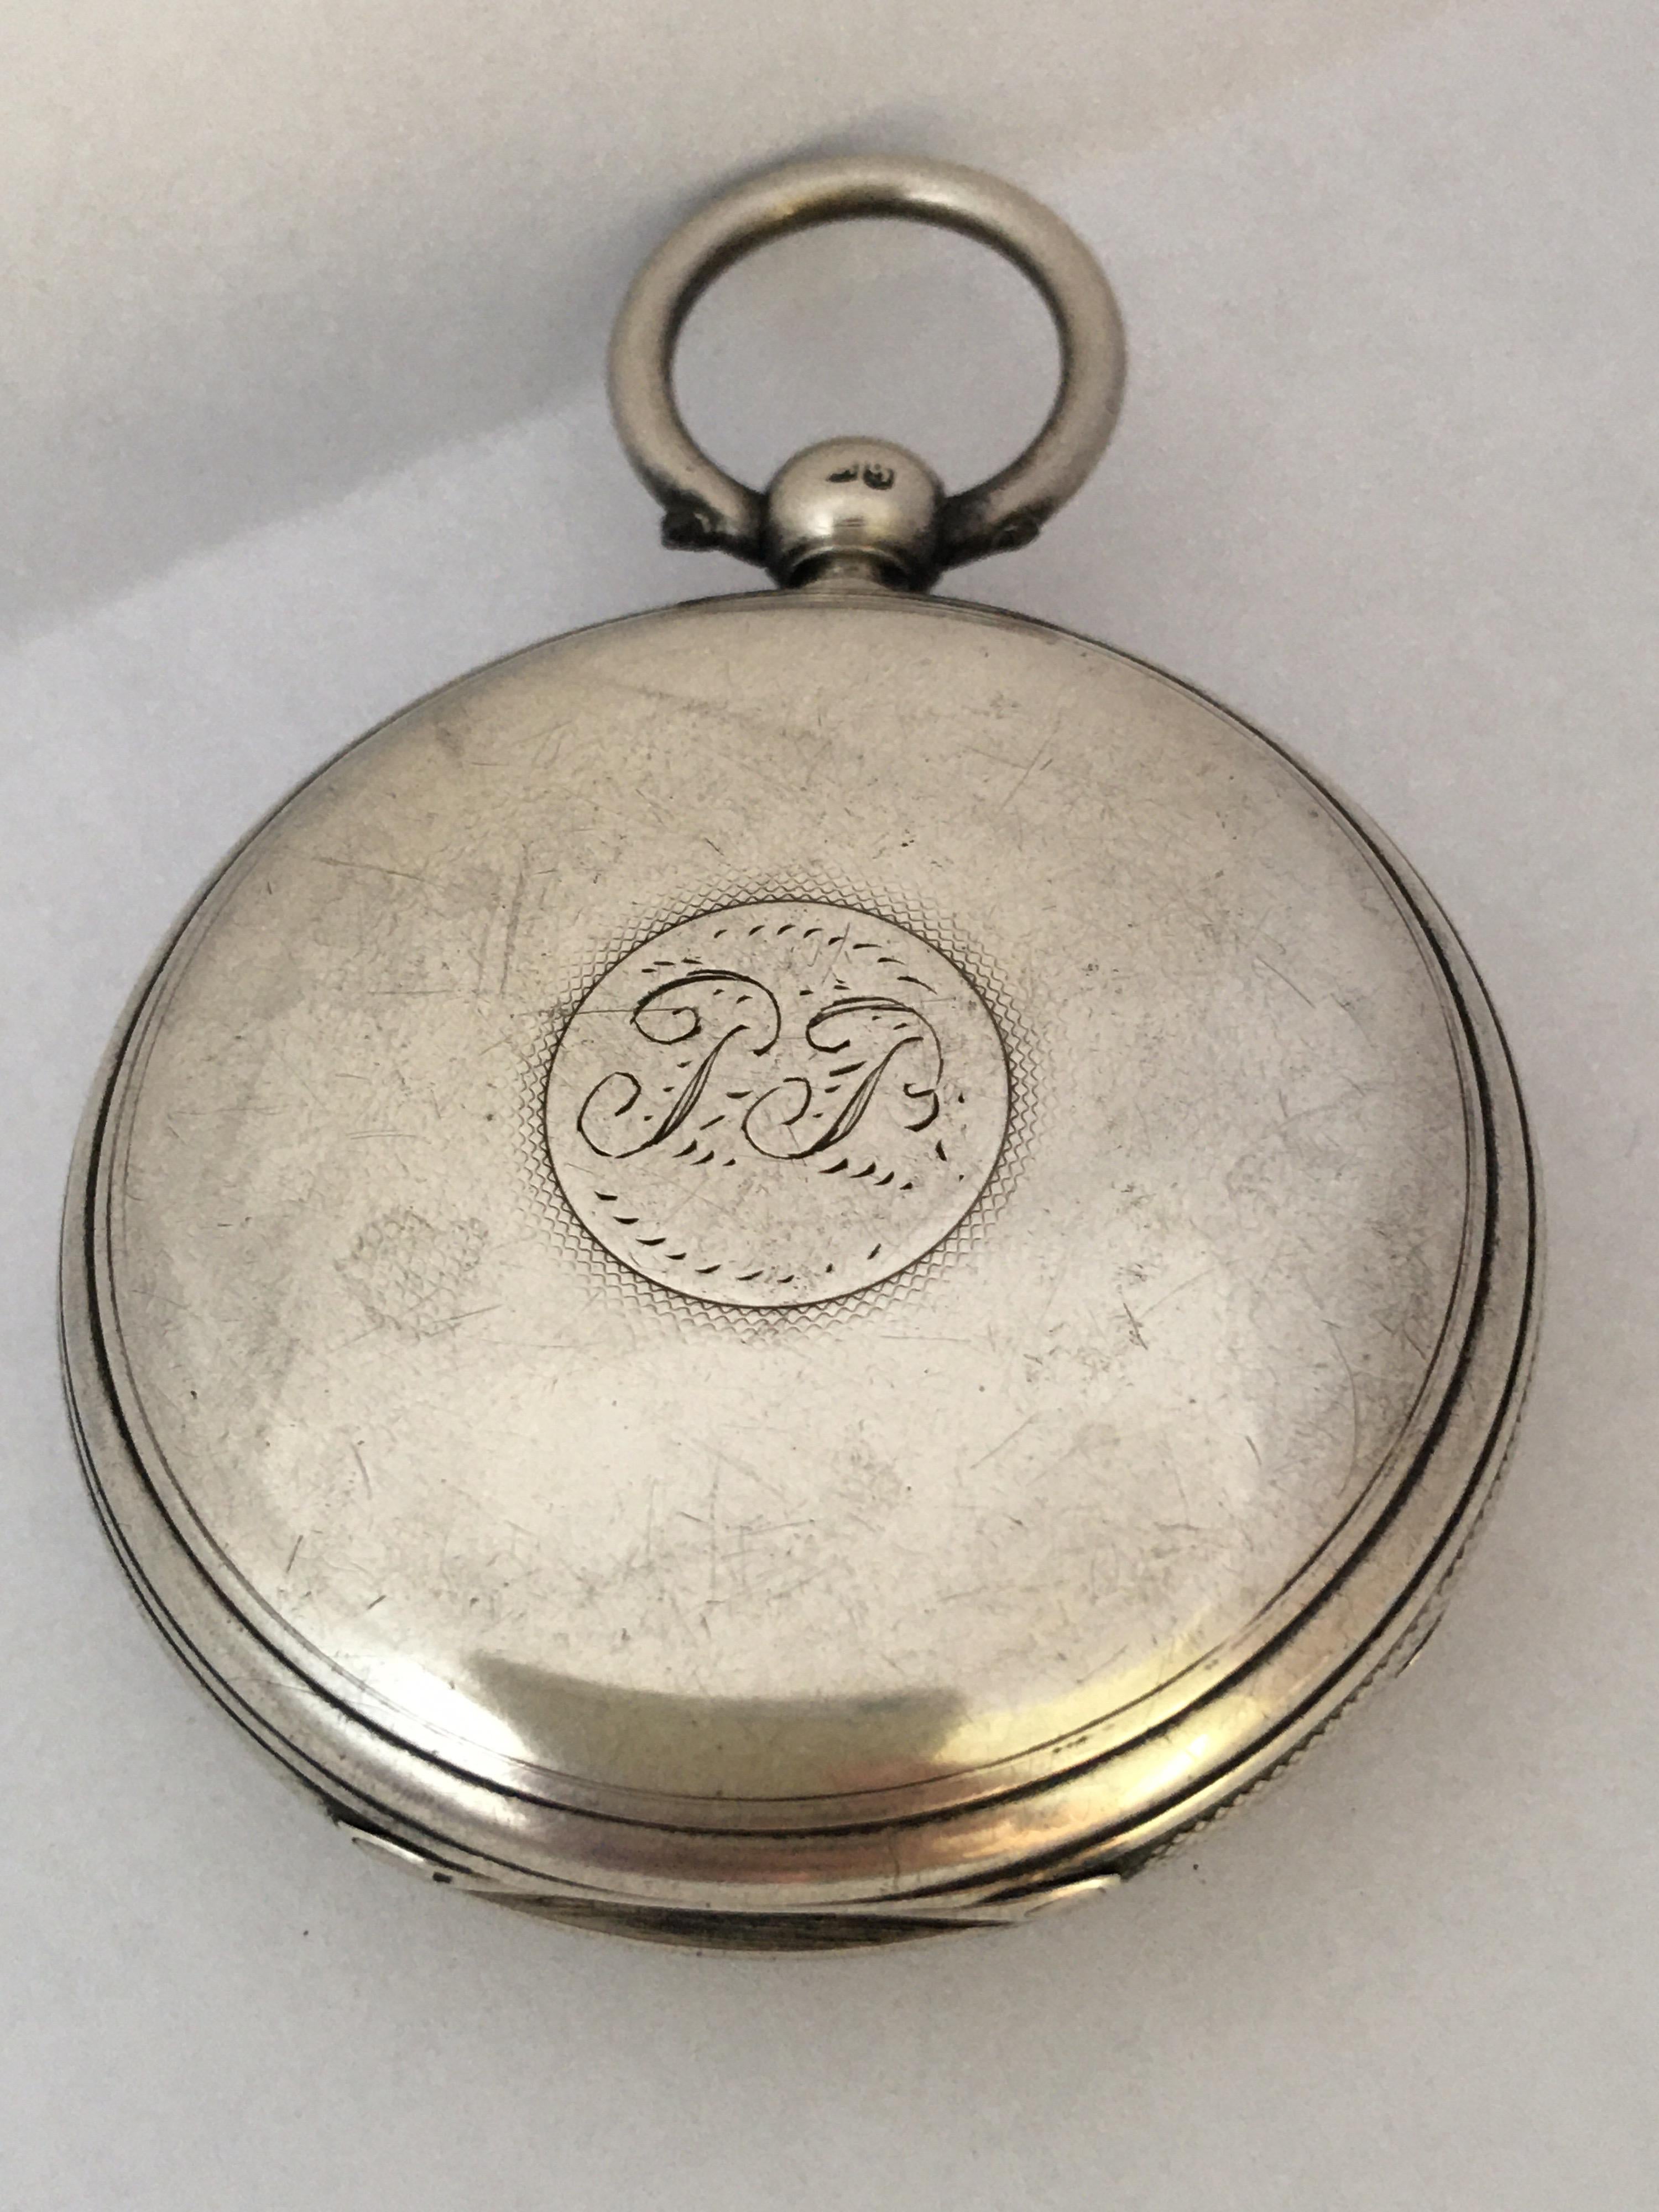 This beautiful 47mm diameter antique key- wound pocket watch is in good working condition and it is ticking well. It is recently been serviced. Visible signs of ageing and wear with small and light scratches on the watch silver case as shown. It